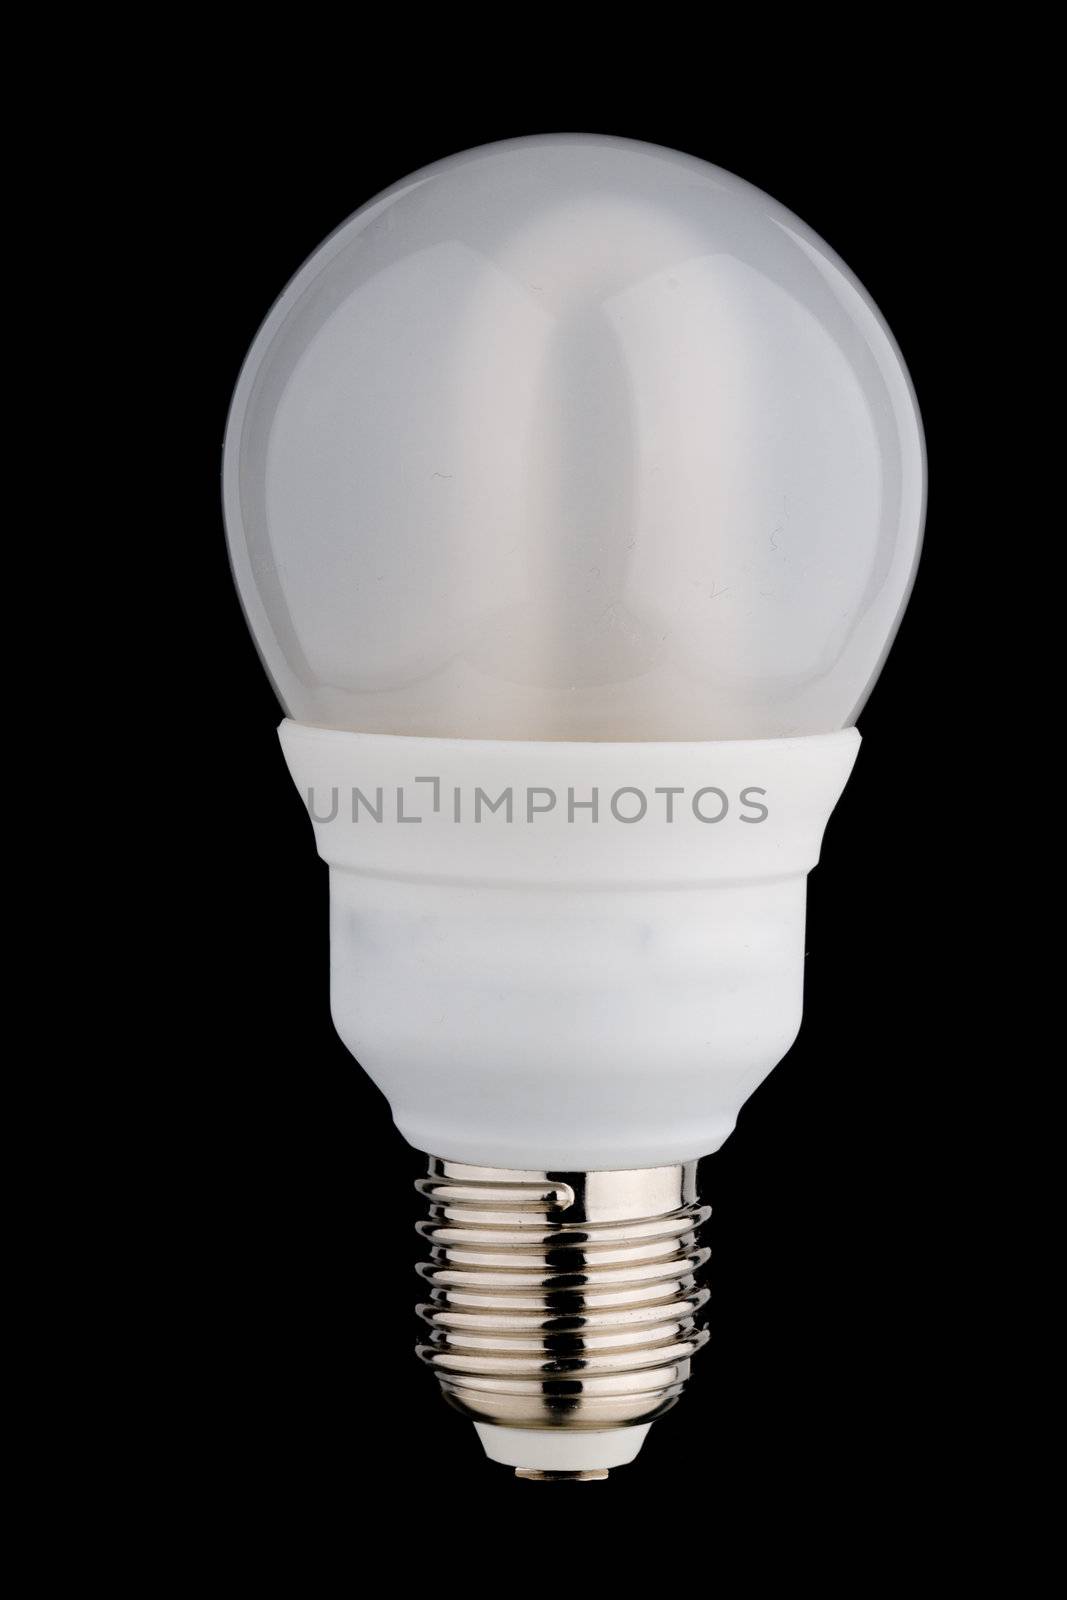 Enclosed fluorescent light bulb separated on black